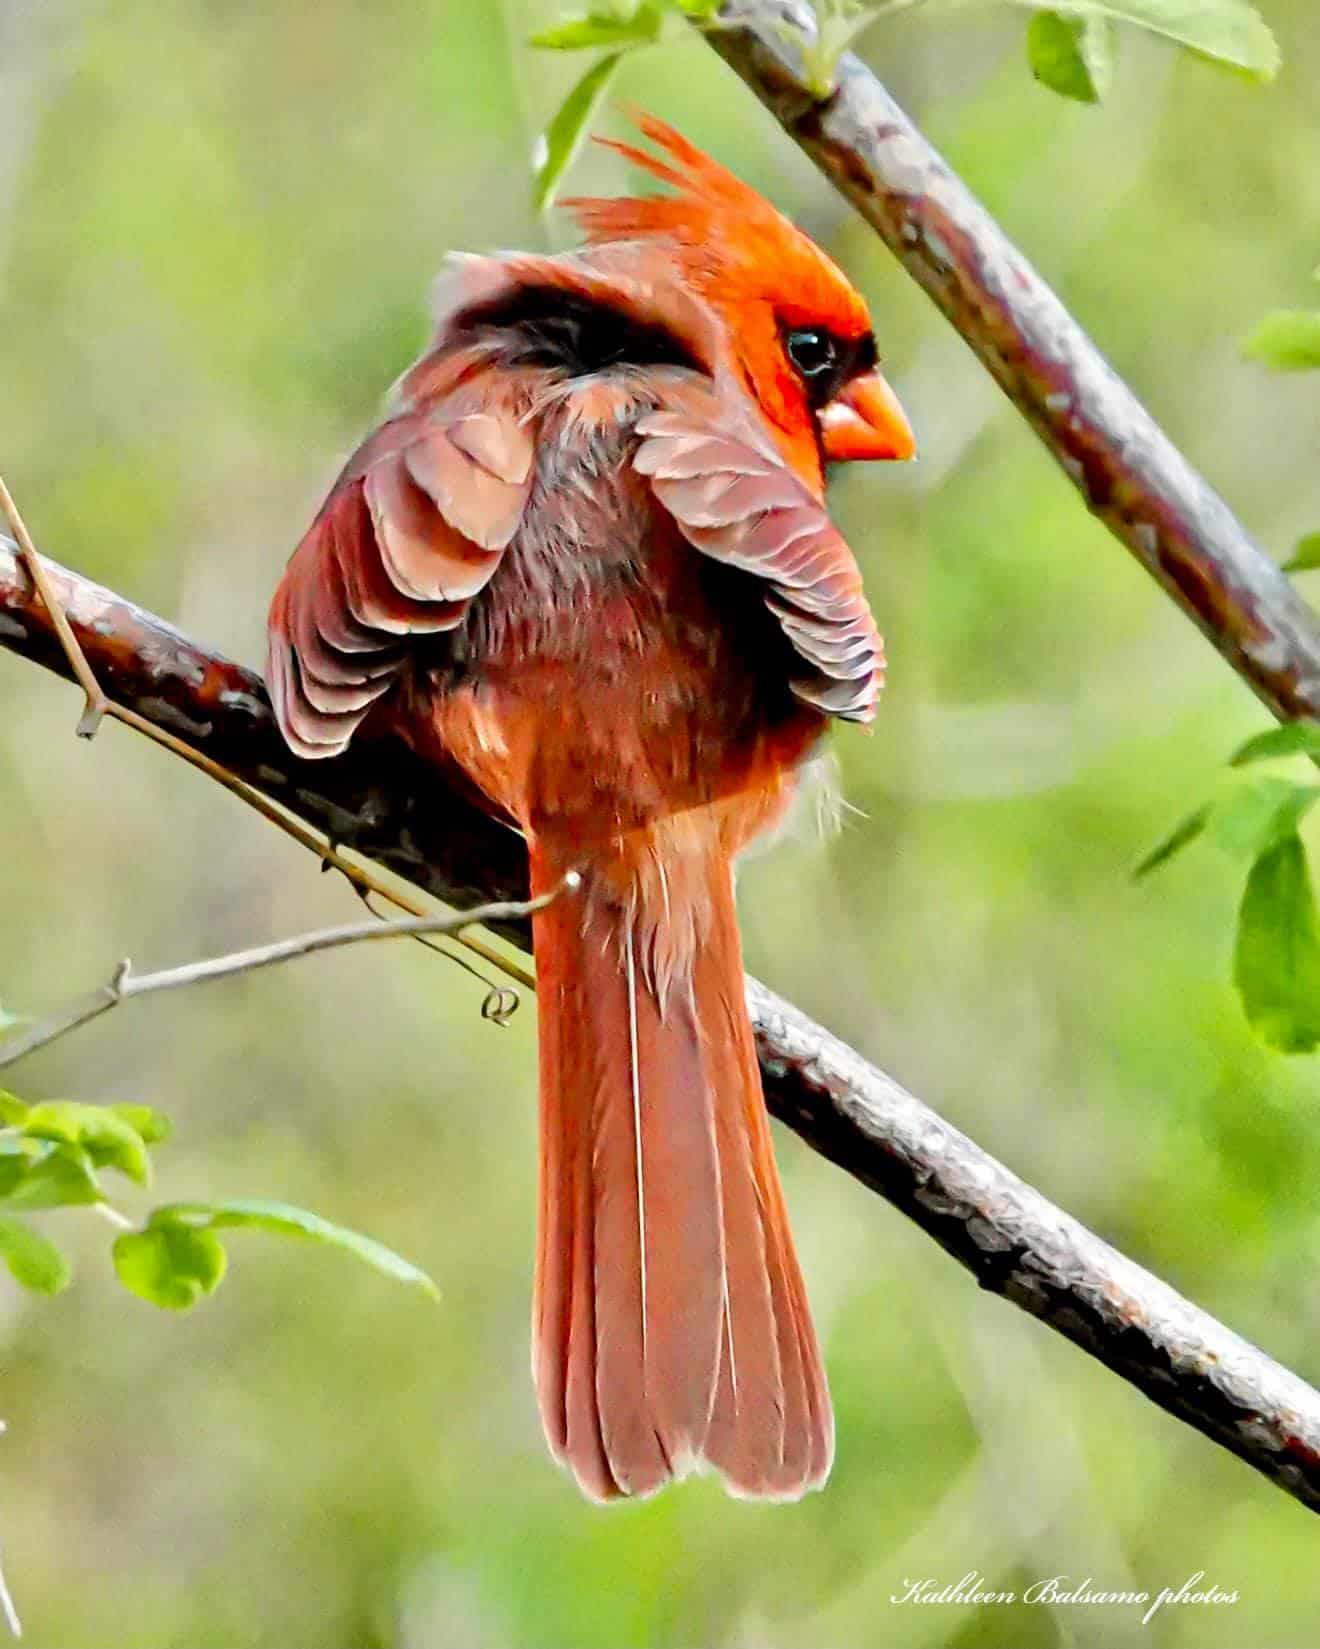 Male northern cardinal sitting on a branch